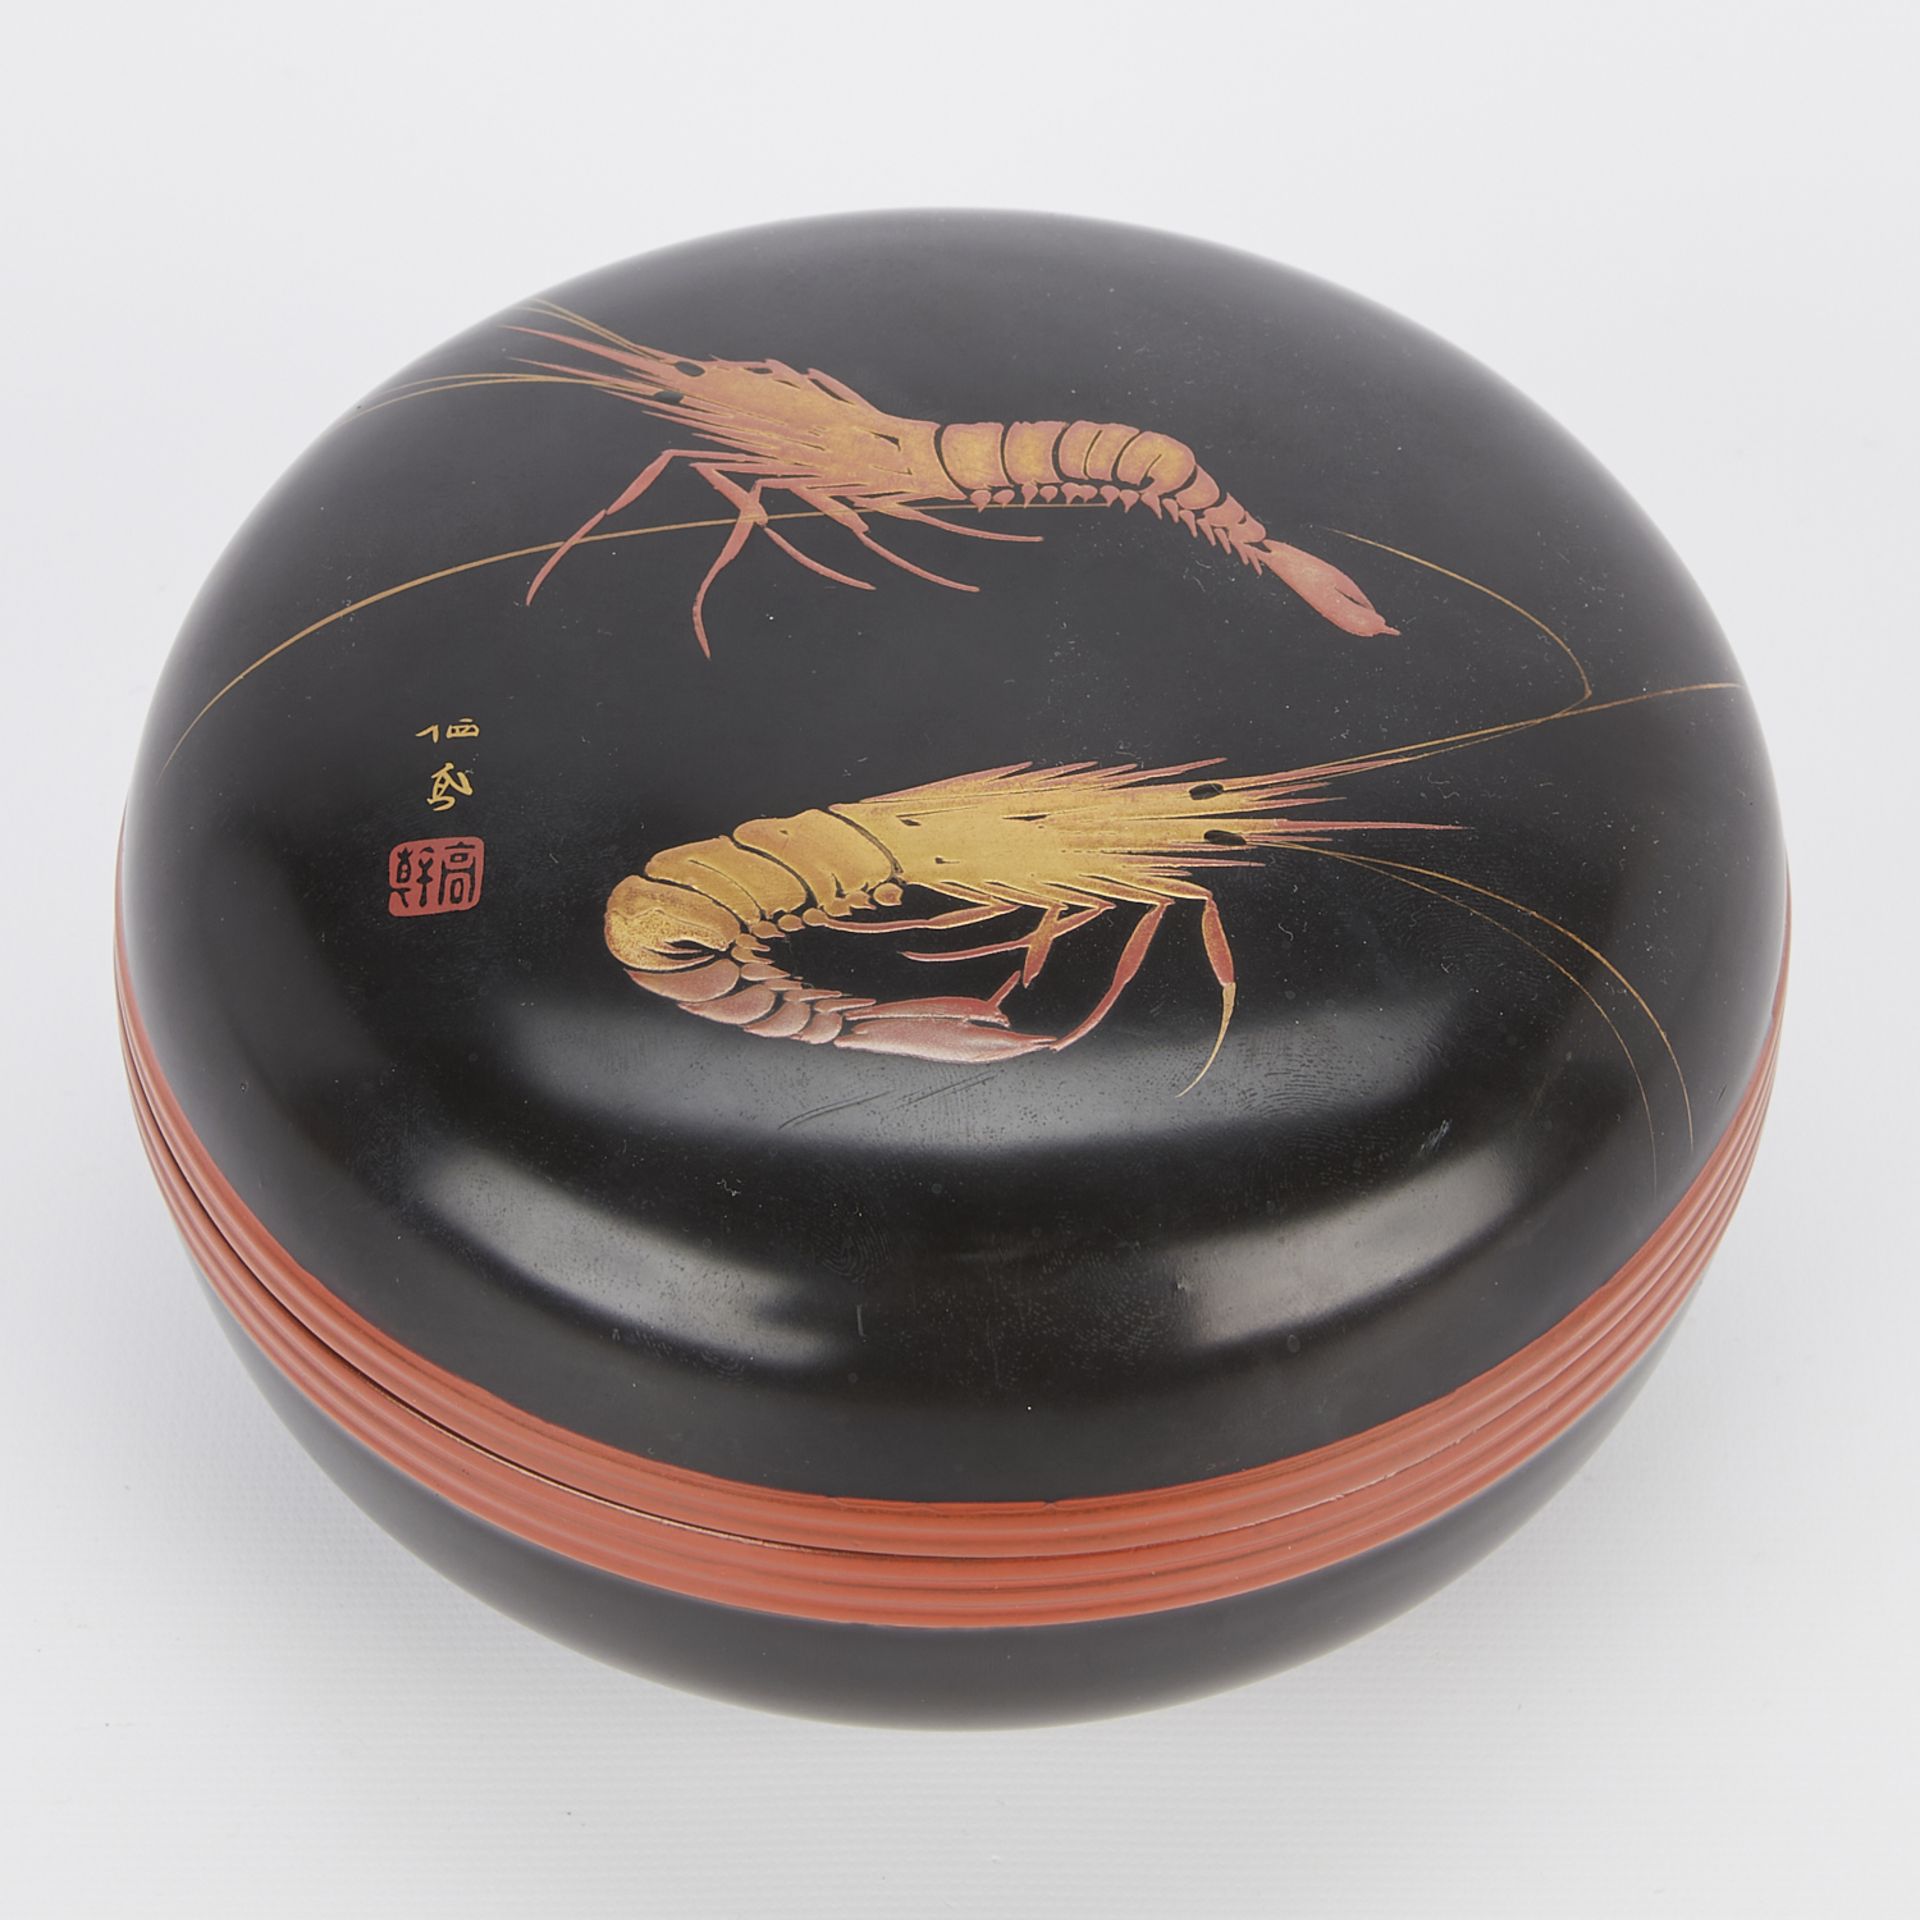 2 Japanese Lacquerware Boxes w/ Crustaceans - Image 2 of 17